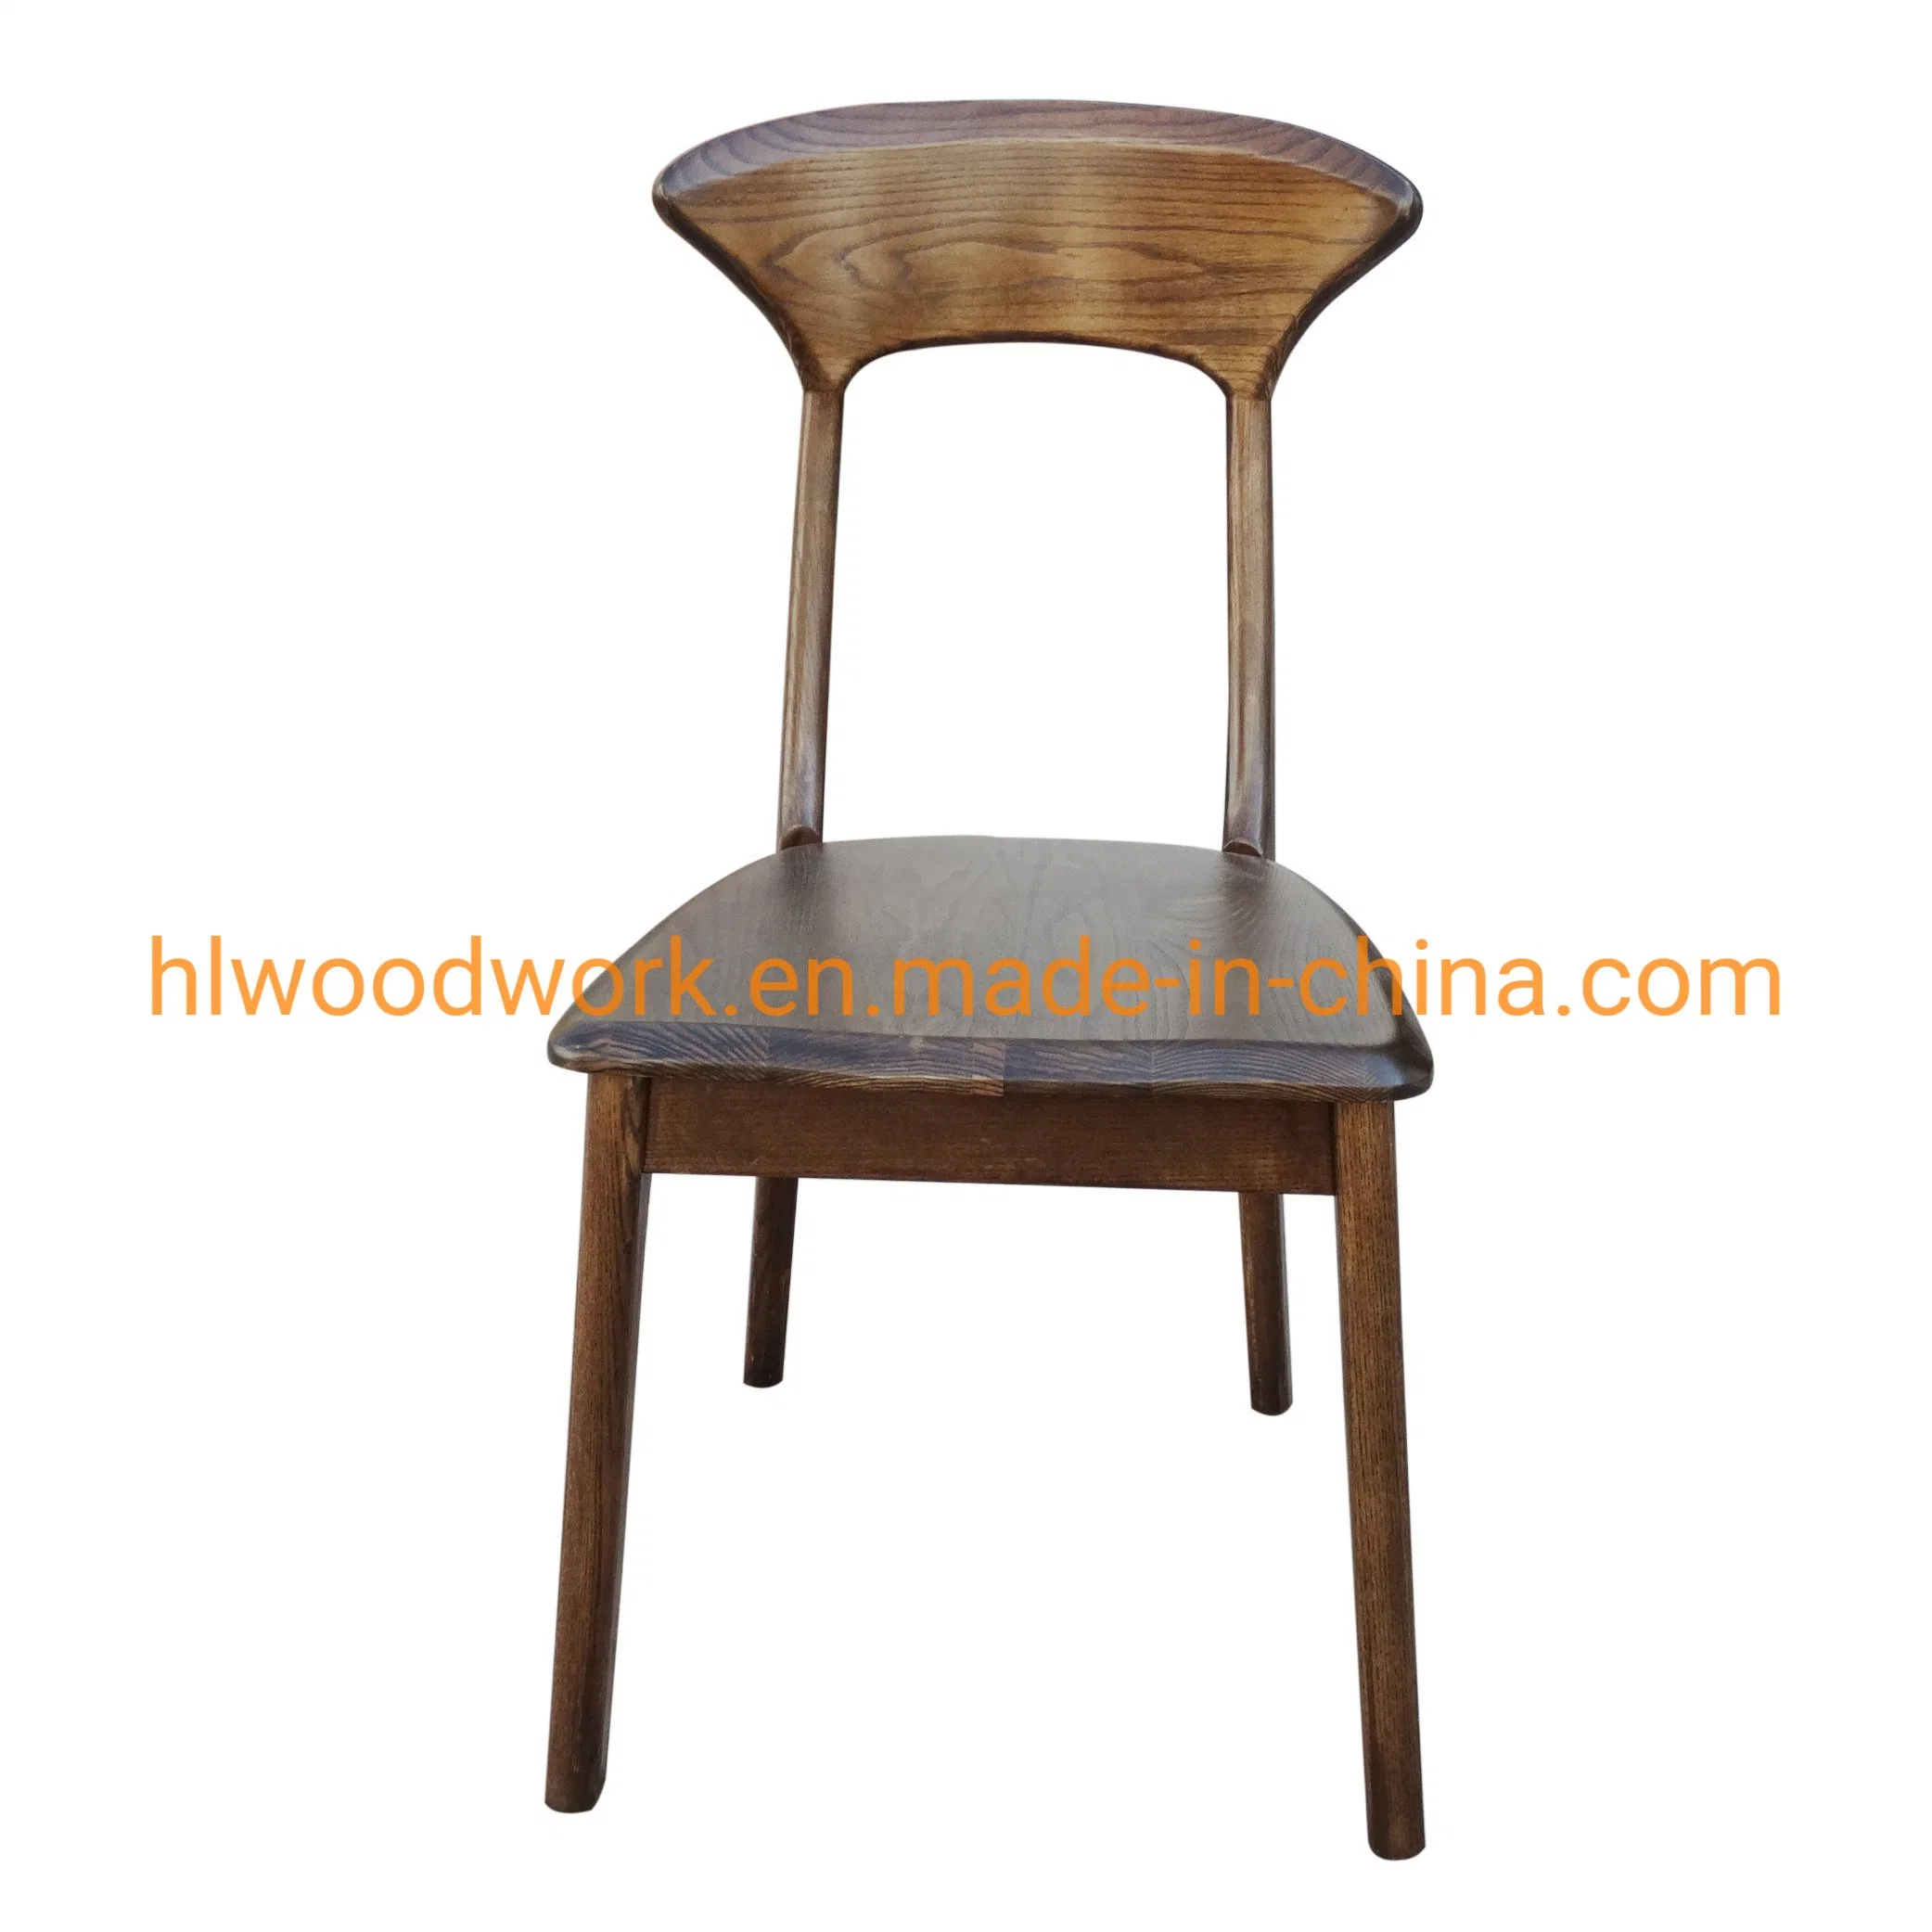 Antique Wooden Dining Chair Home Hotel Restaurant Chair Axe Back Chair Ash Wood Walnut Color Solid Wood Chair Wholesale Furniture Dining Room Furniture